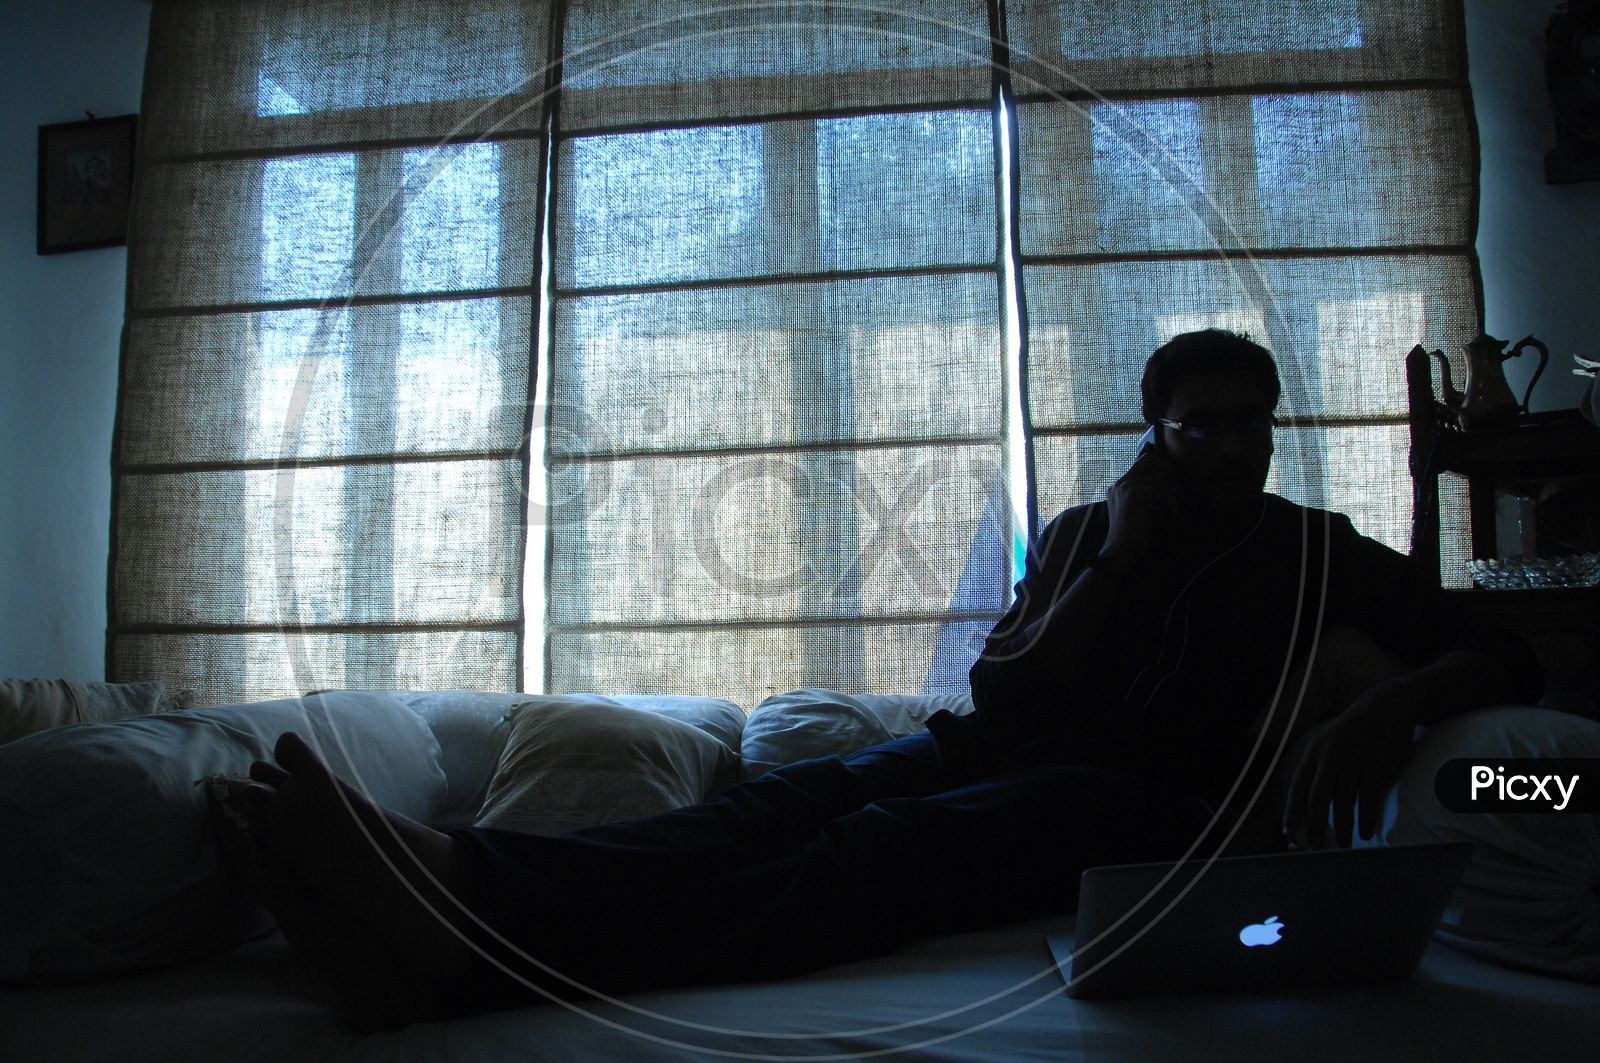 Silhouette Of a  Man Using Laptop In a House Over a Window